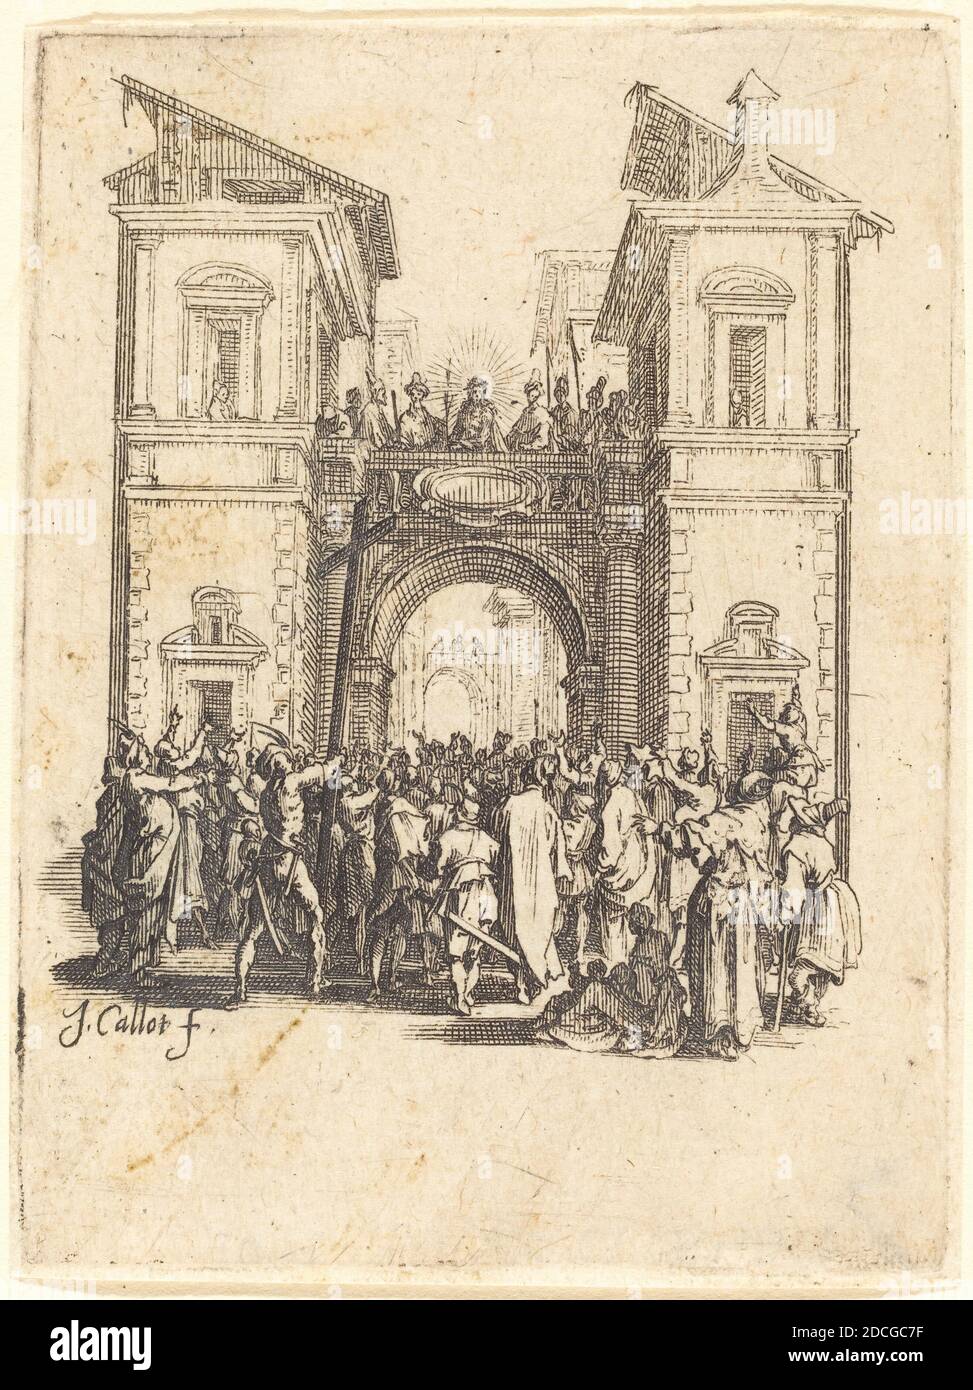 Jacques Callot, (artist), French, 1592 - 1635, Ecce Homo, The Small Passion, (series), c. 1624/1625, etching Stock Photo